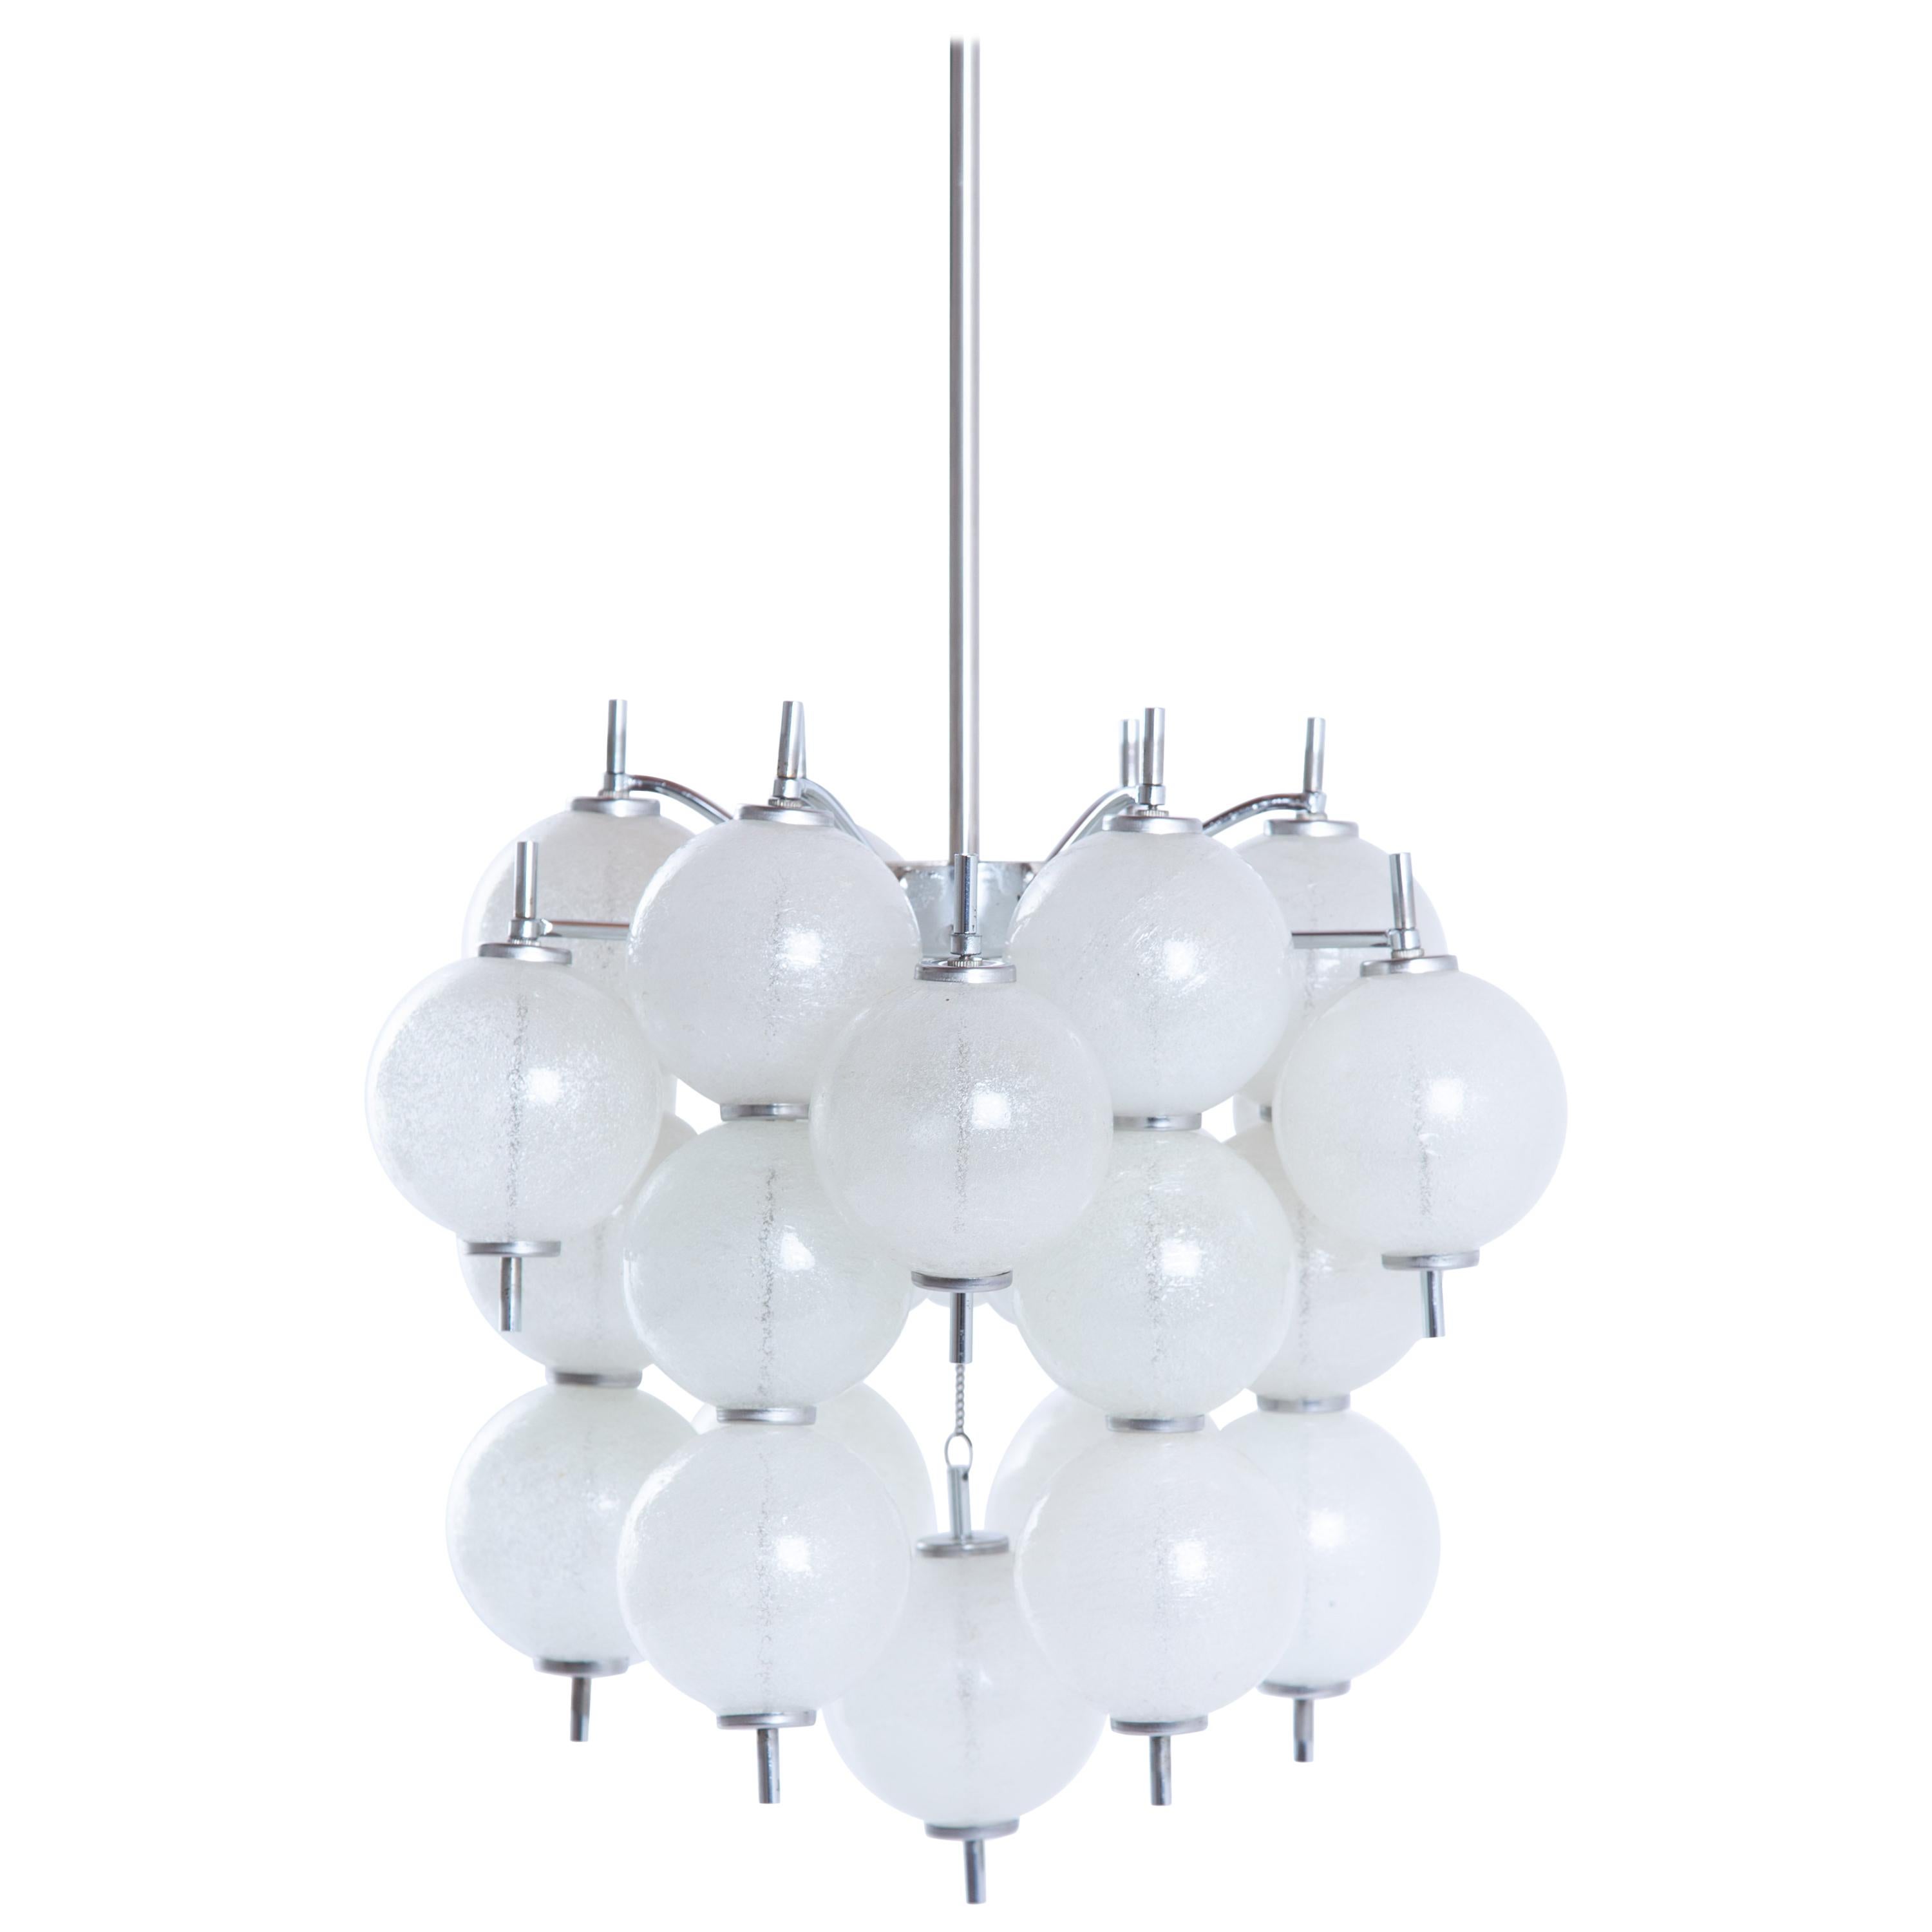 RAAK hanging lamp with 25 glass balls. Three bulbs in the middle of the lamp. Inclusive a nice ceiling cap. The balls are of 